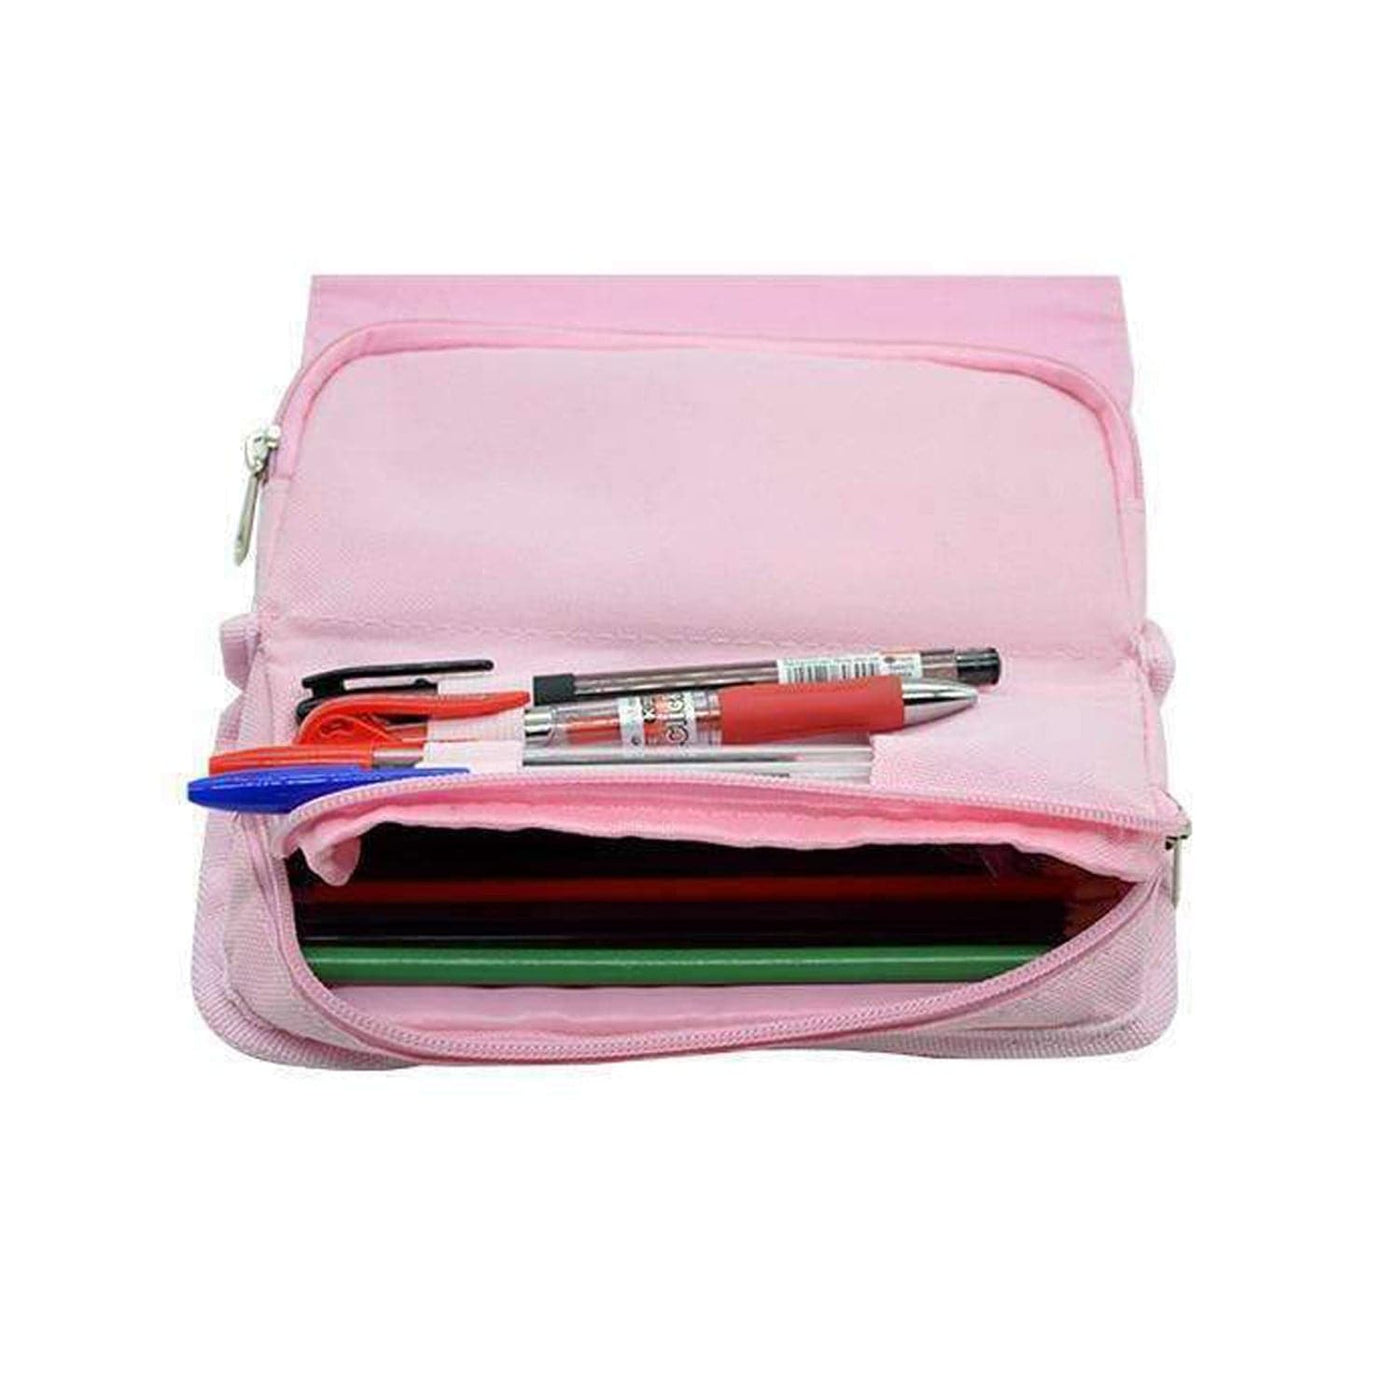 Oh My - Gavin And Stacey Pencil Case